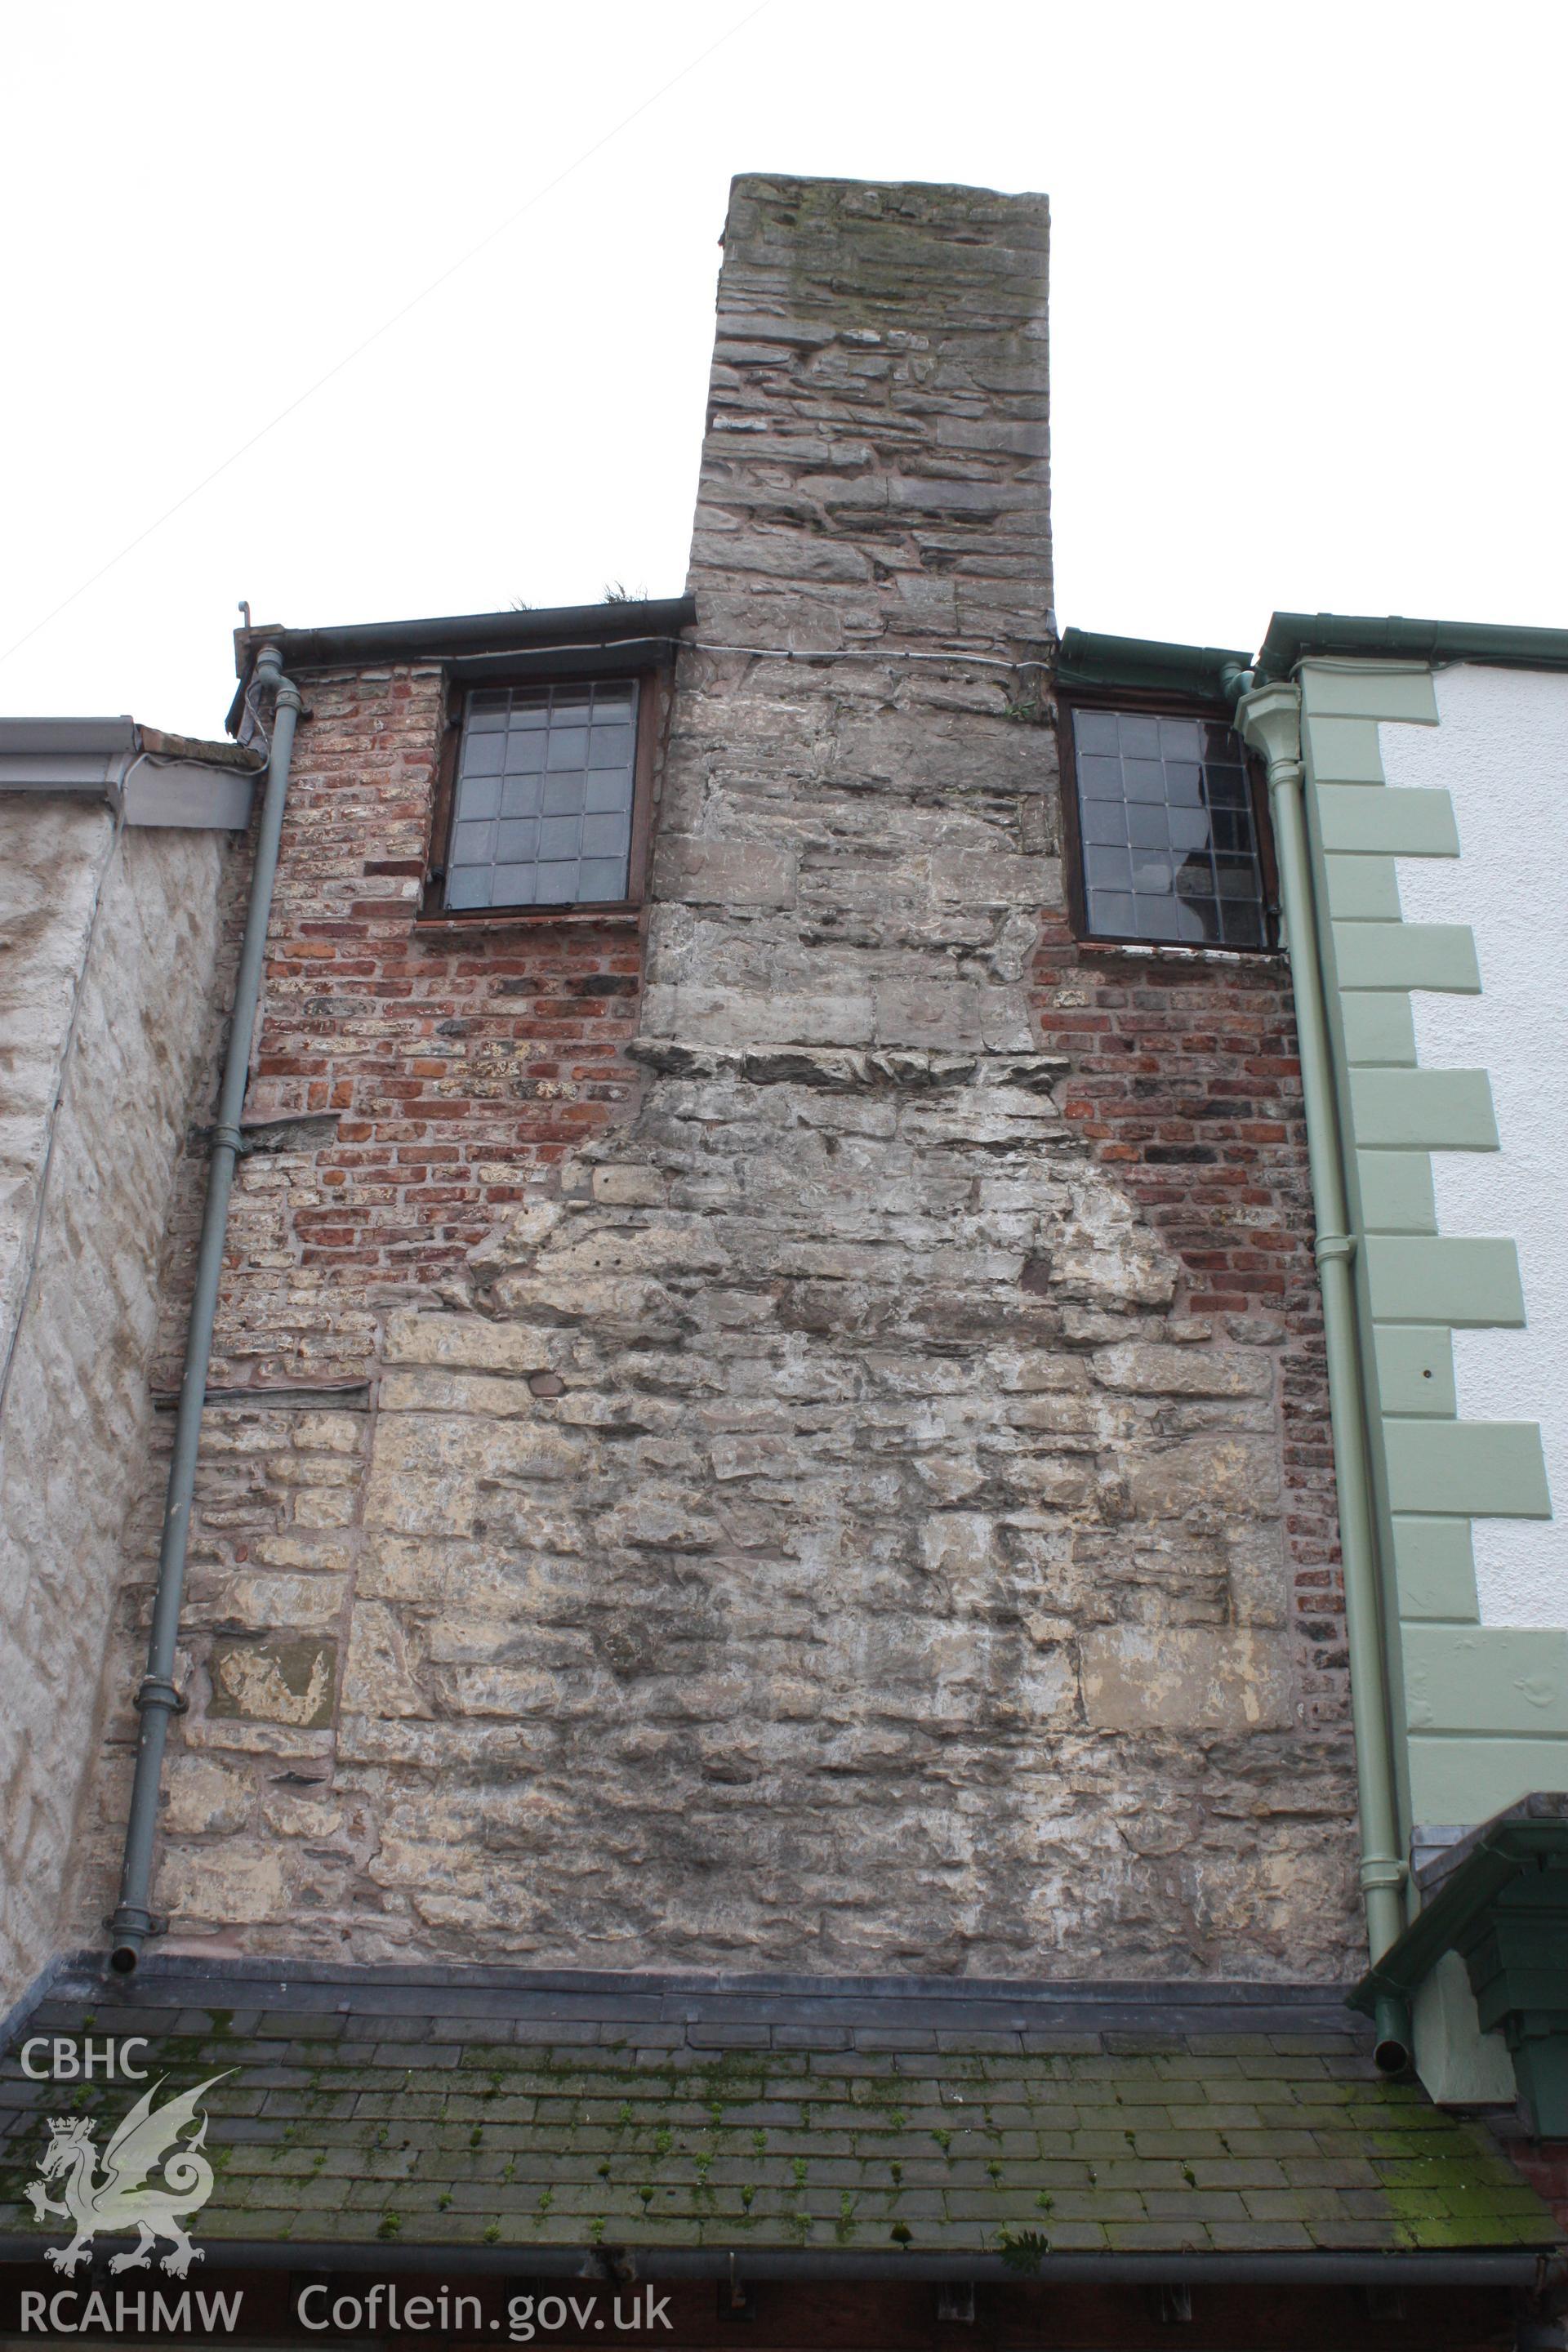 Colour photograph showing exterior view of chimney at the Bake-house, Back row, Denbigh, Photographed during survey conducted by Geoff Ward on 17th May 2011.